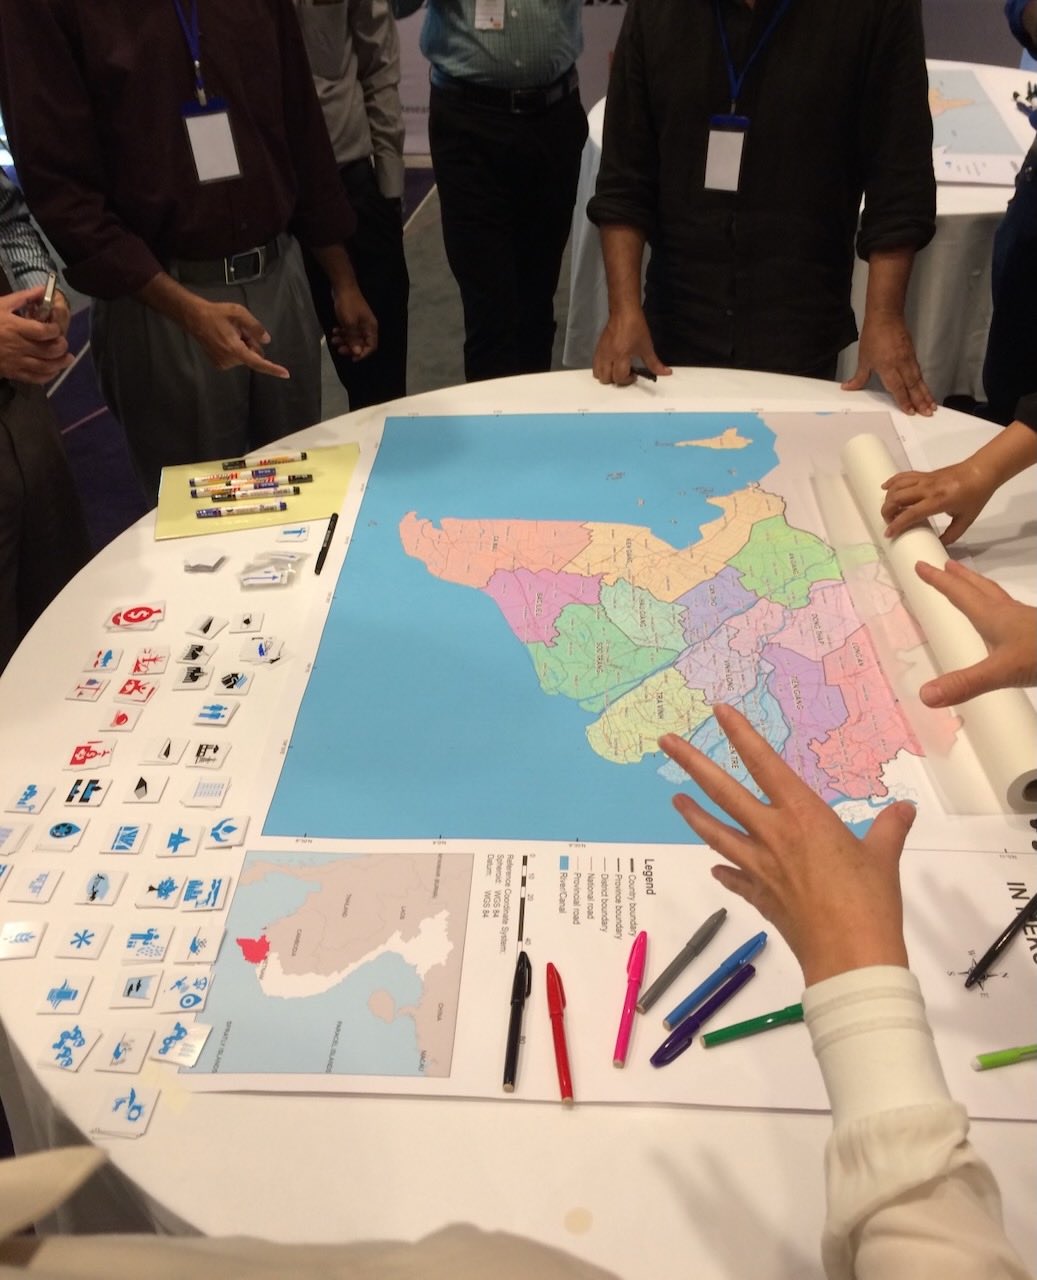 A map of the Mekong Delta oriented to the left is on a round white table. There are piles of small white squares with different icons organized into rows below the map. Colored markers and pens are also on the table next to and below the map. A person's hands are visible at the bottom left corner, while the bodies of others are also seen standing around the table.